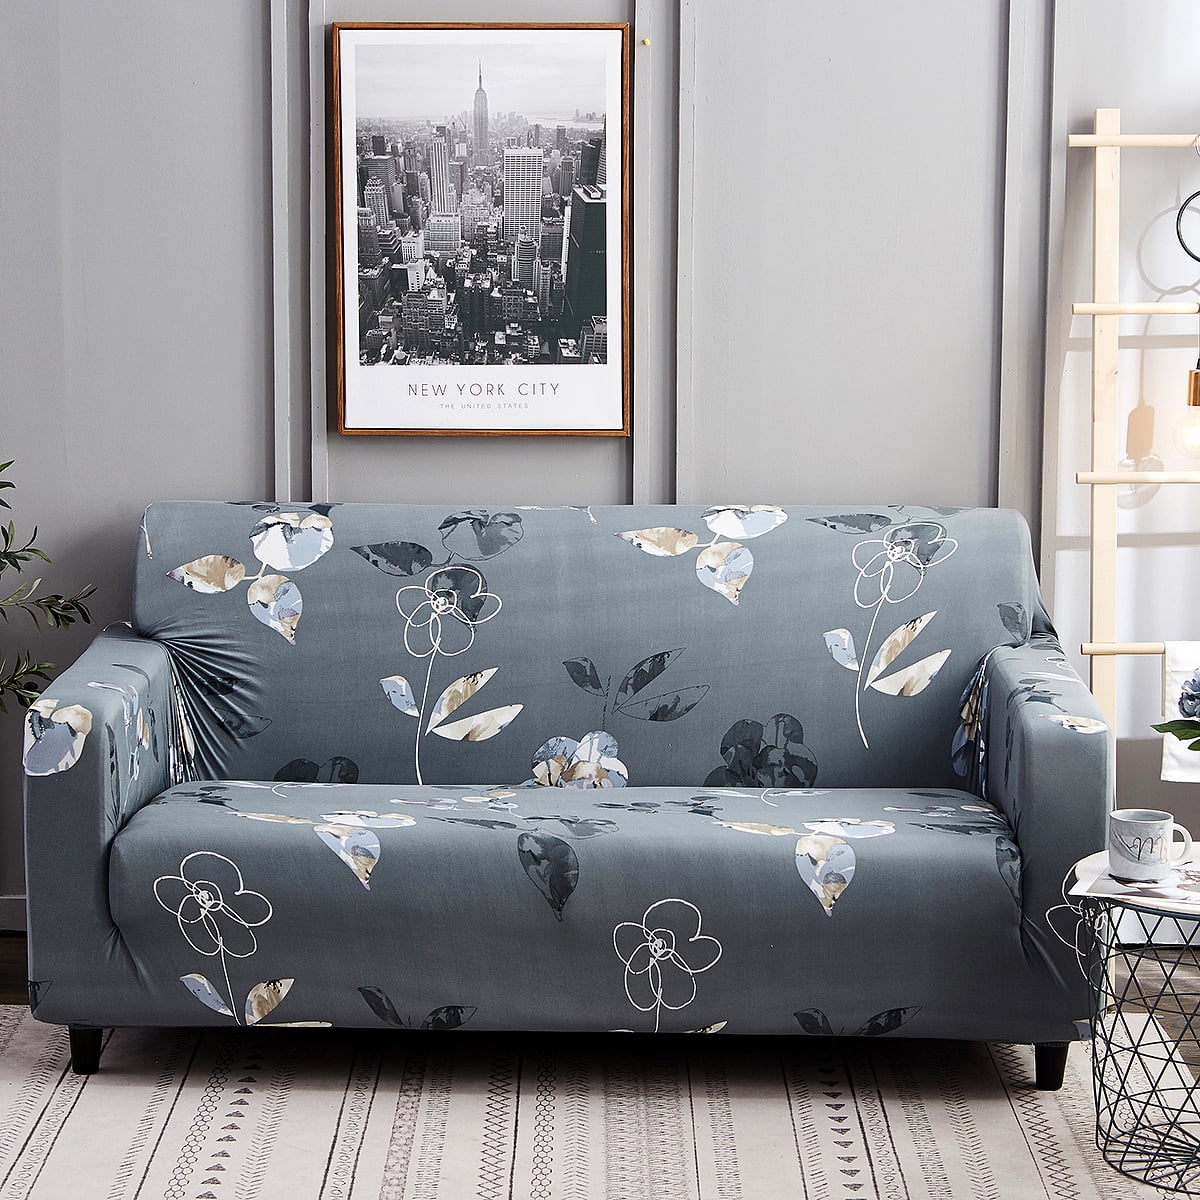 Details about   1-4 Seater Washable Soild Printed  Covers for Living Couch Cover Sofa Slipcover 